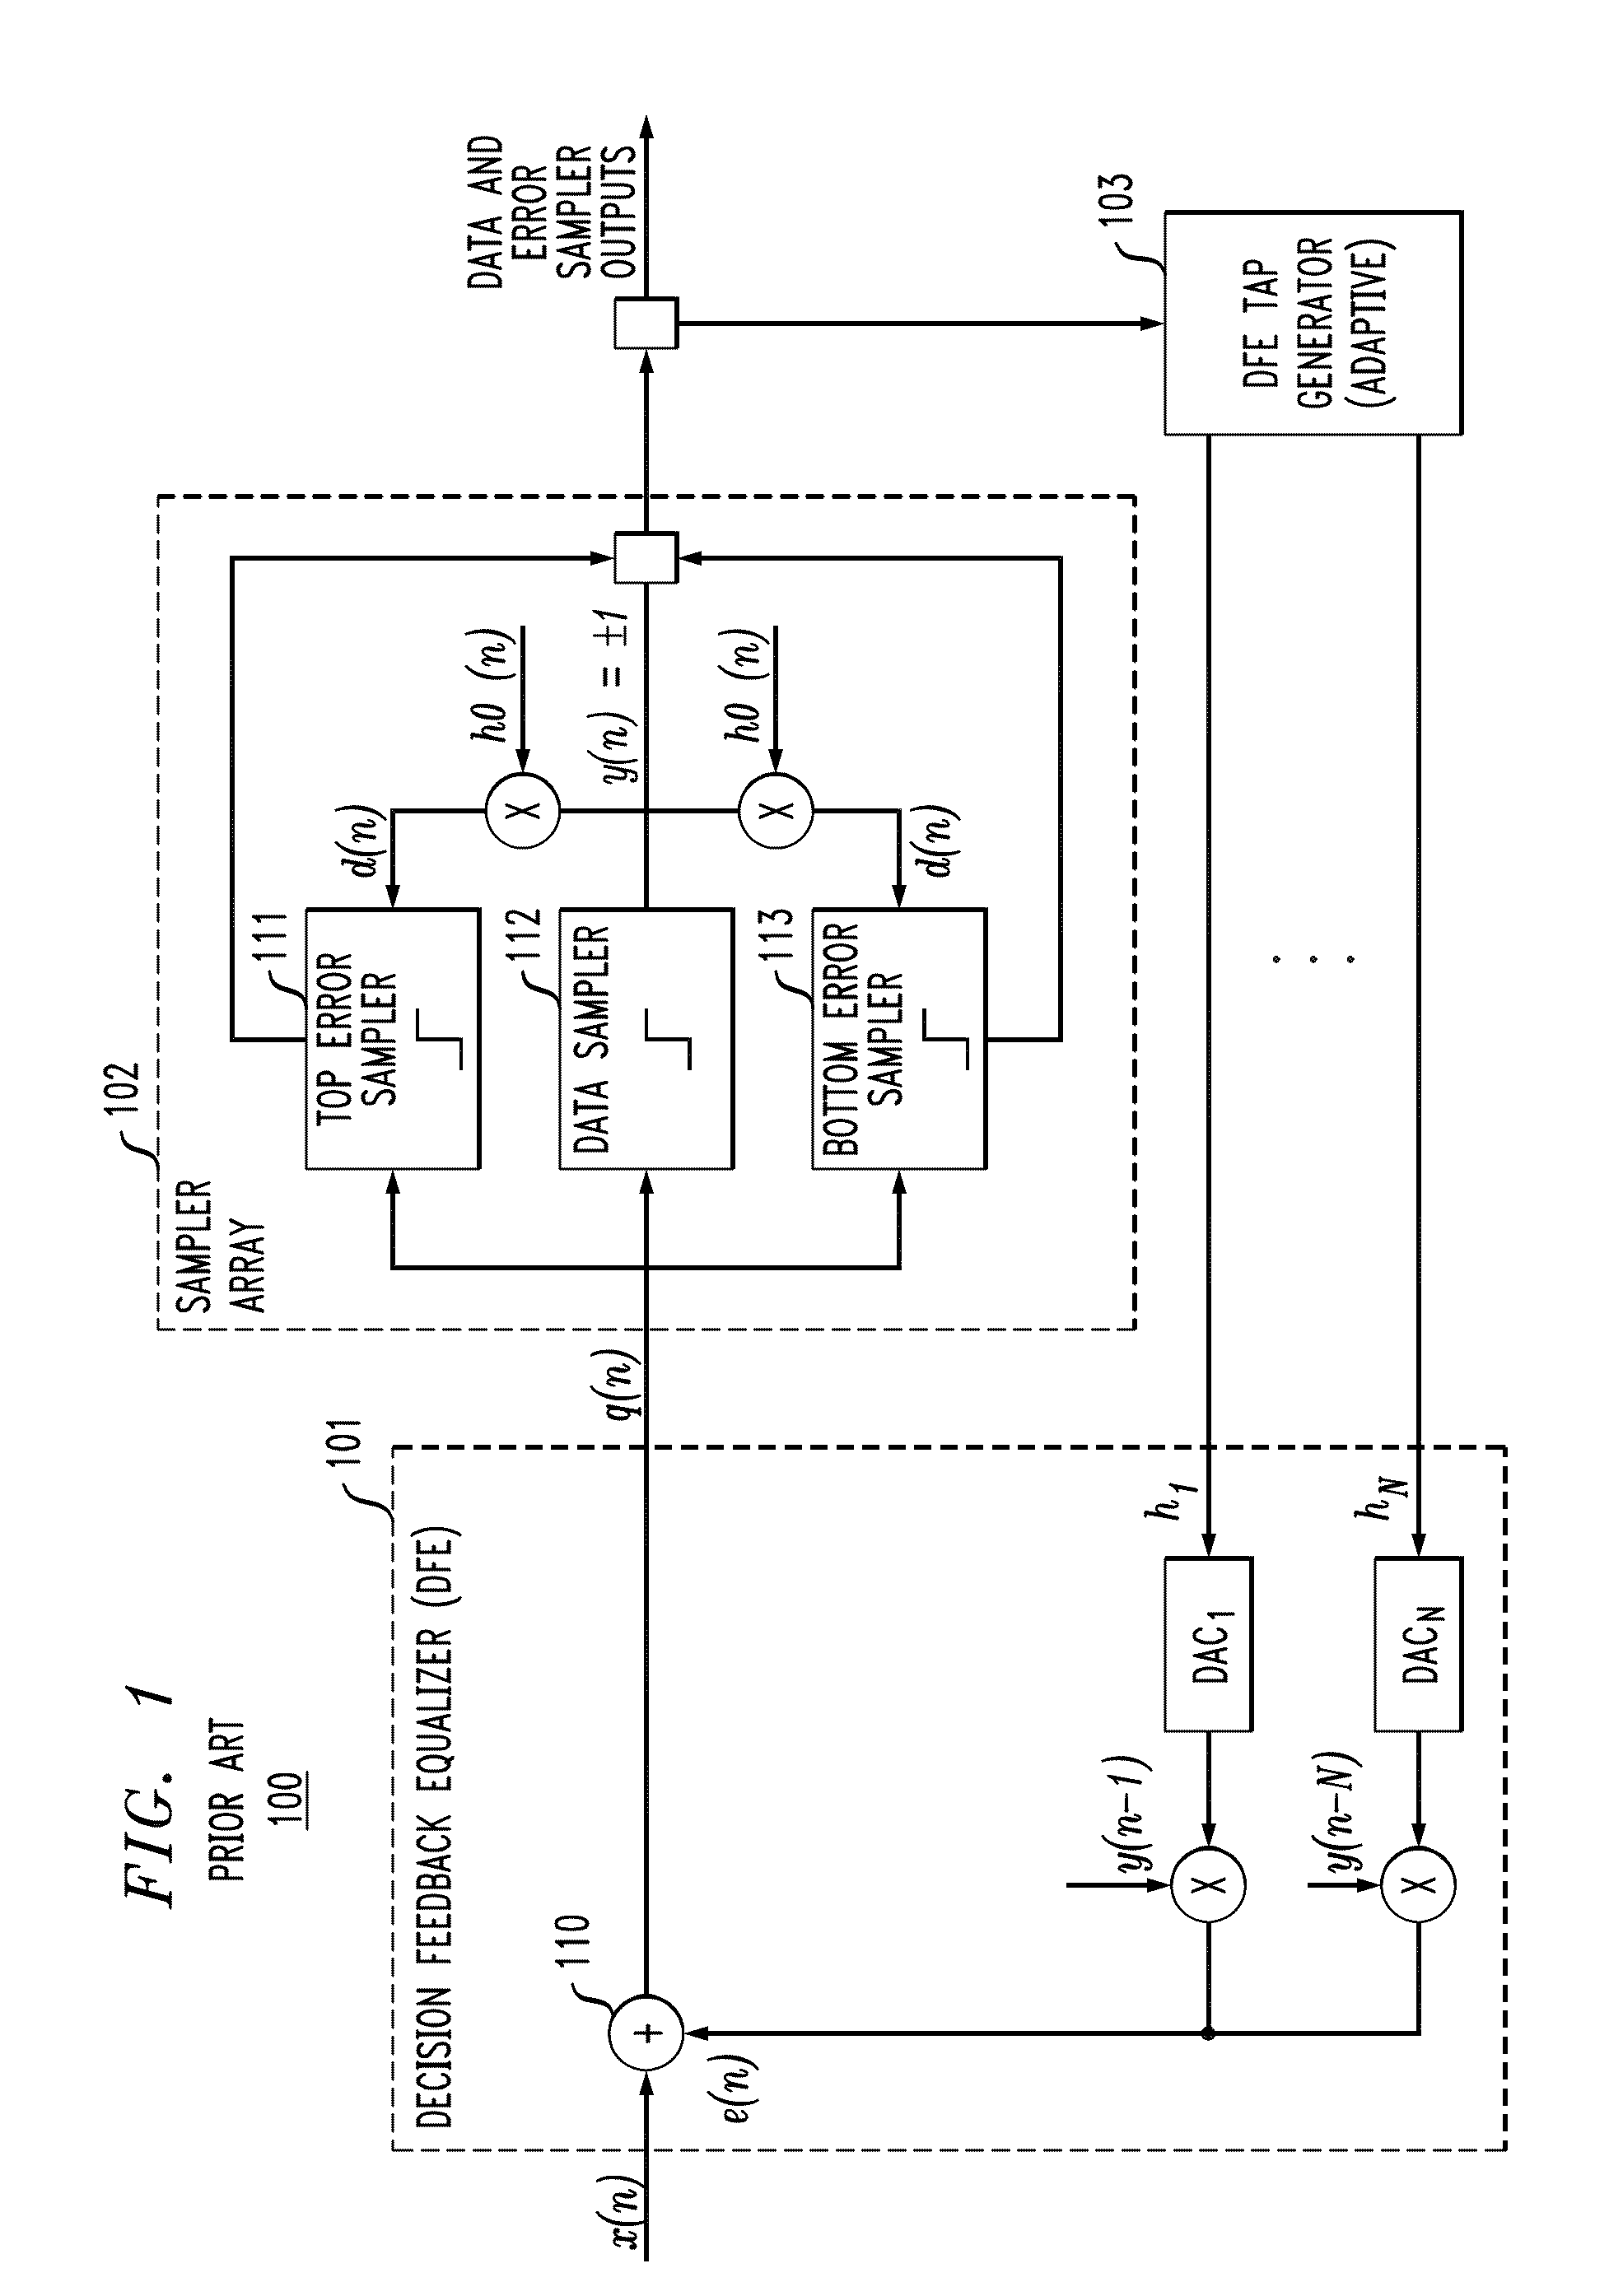 Statistically-Adapted Receiver and Transmitter Equalization